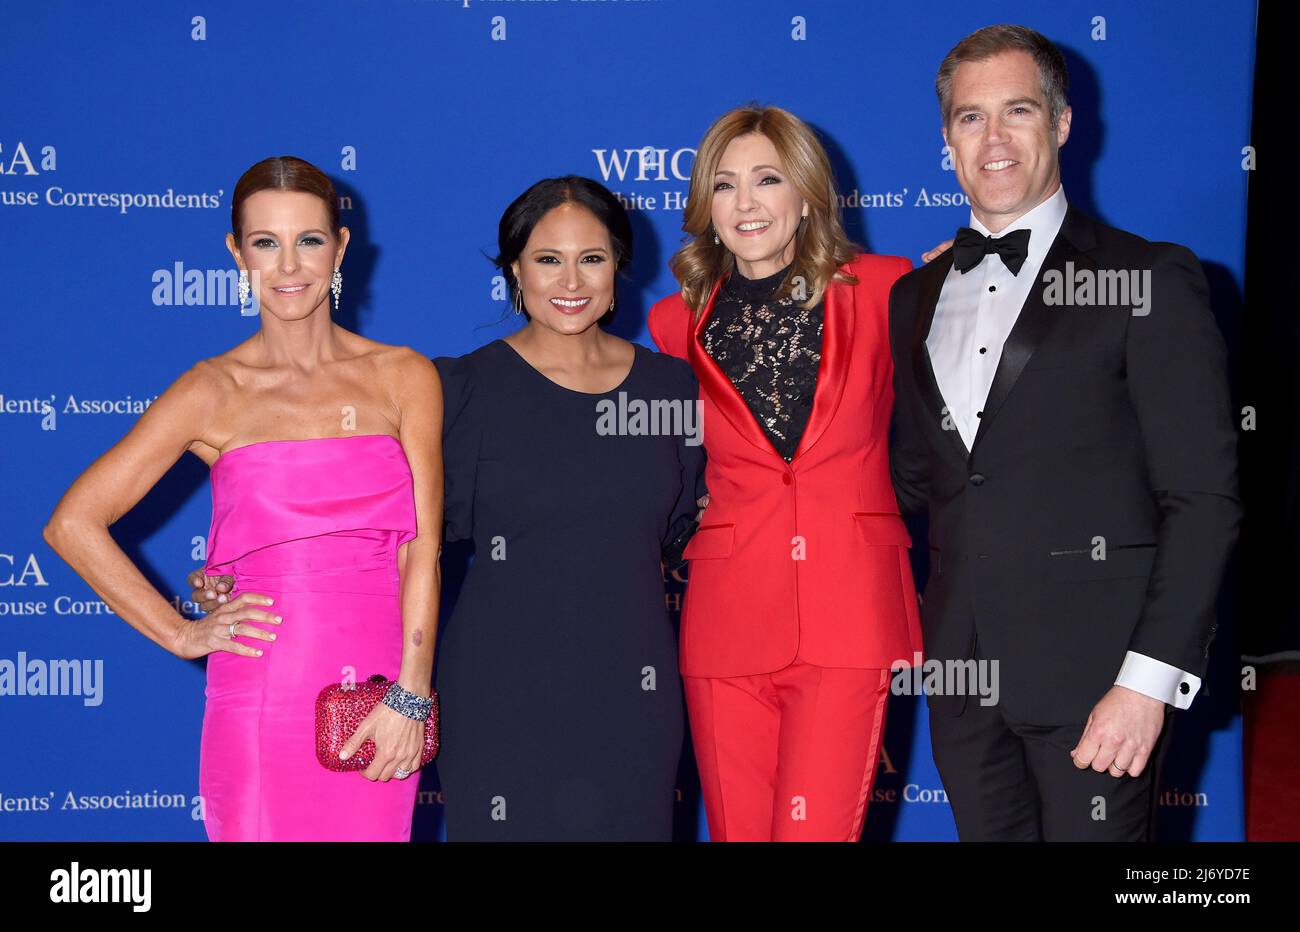 Stephanie Ruhle, Kristen Welker, Chris Jansing and Peter Alexander arriving at the 2022 White House Correspondents' dinner held at the Washington Hilton Hotel on April 30, 2022 in Washington, D.C. © Tammie Arroyo / AFF-USA.com Stock Photo